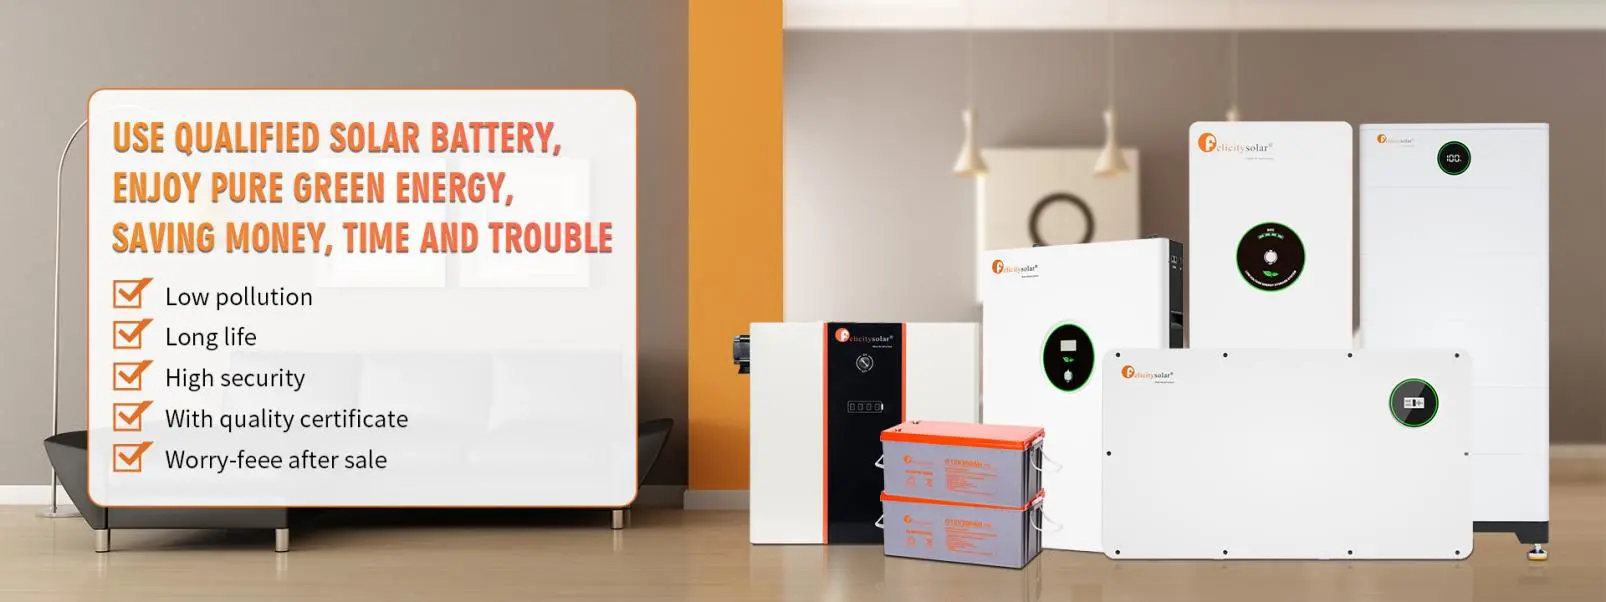 Lithium-Ion Battery Backup For Home